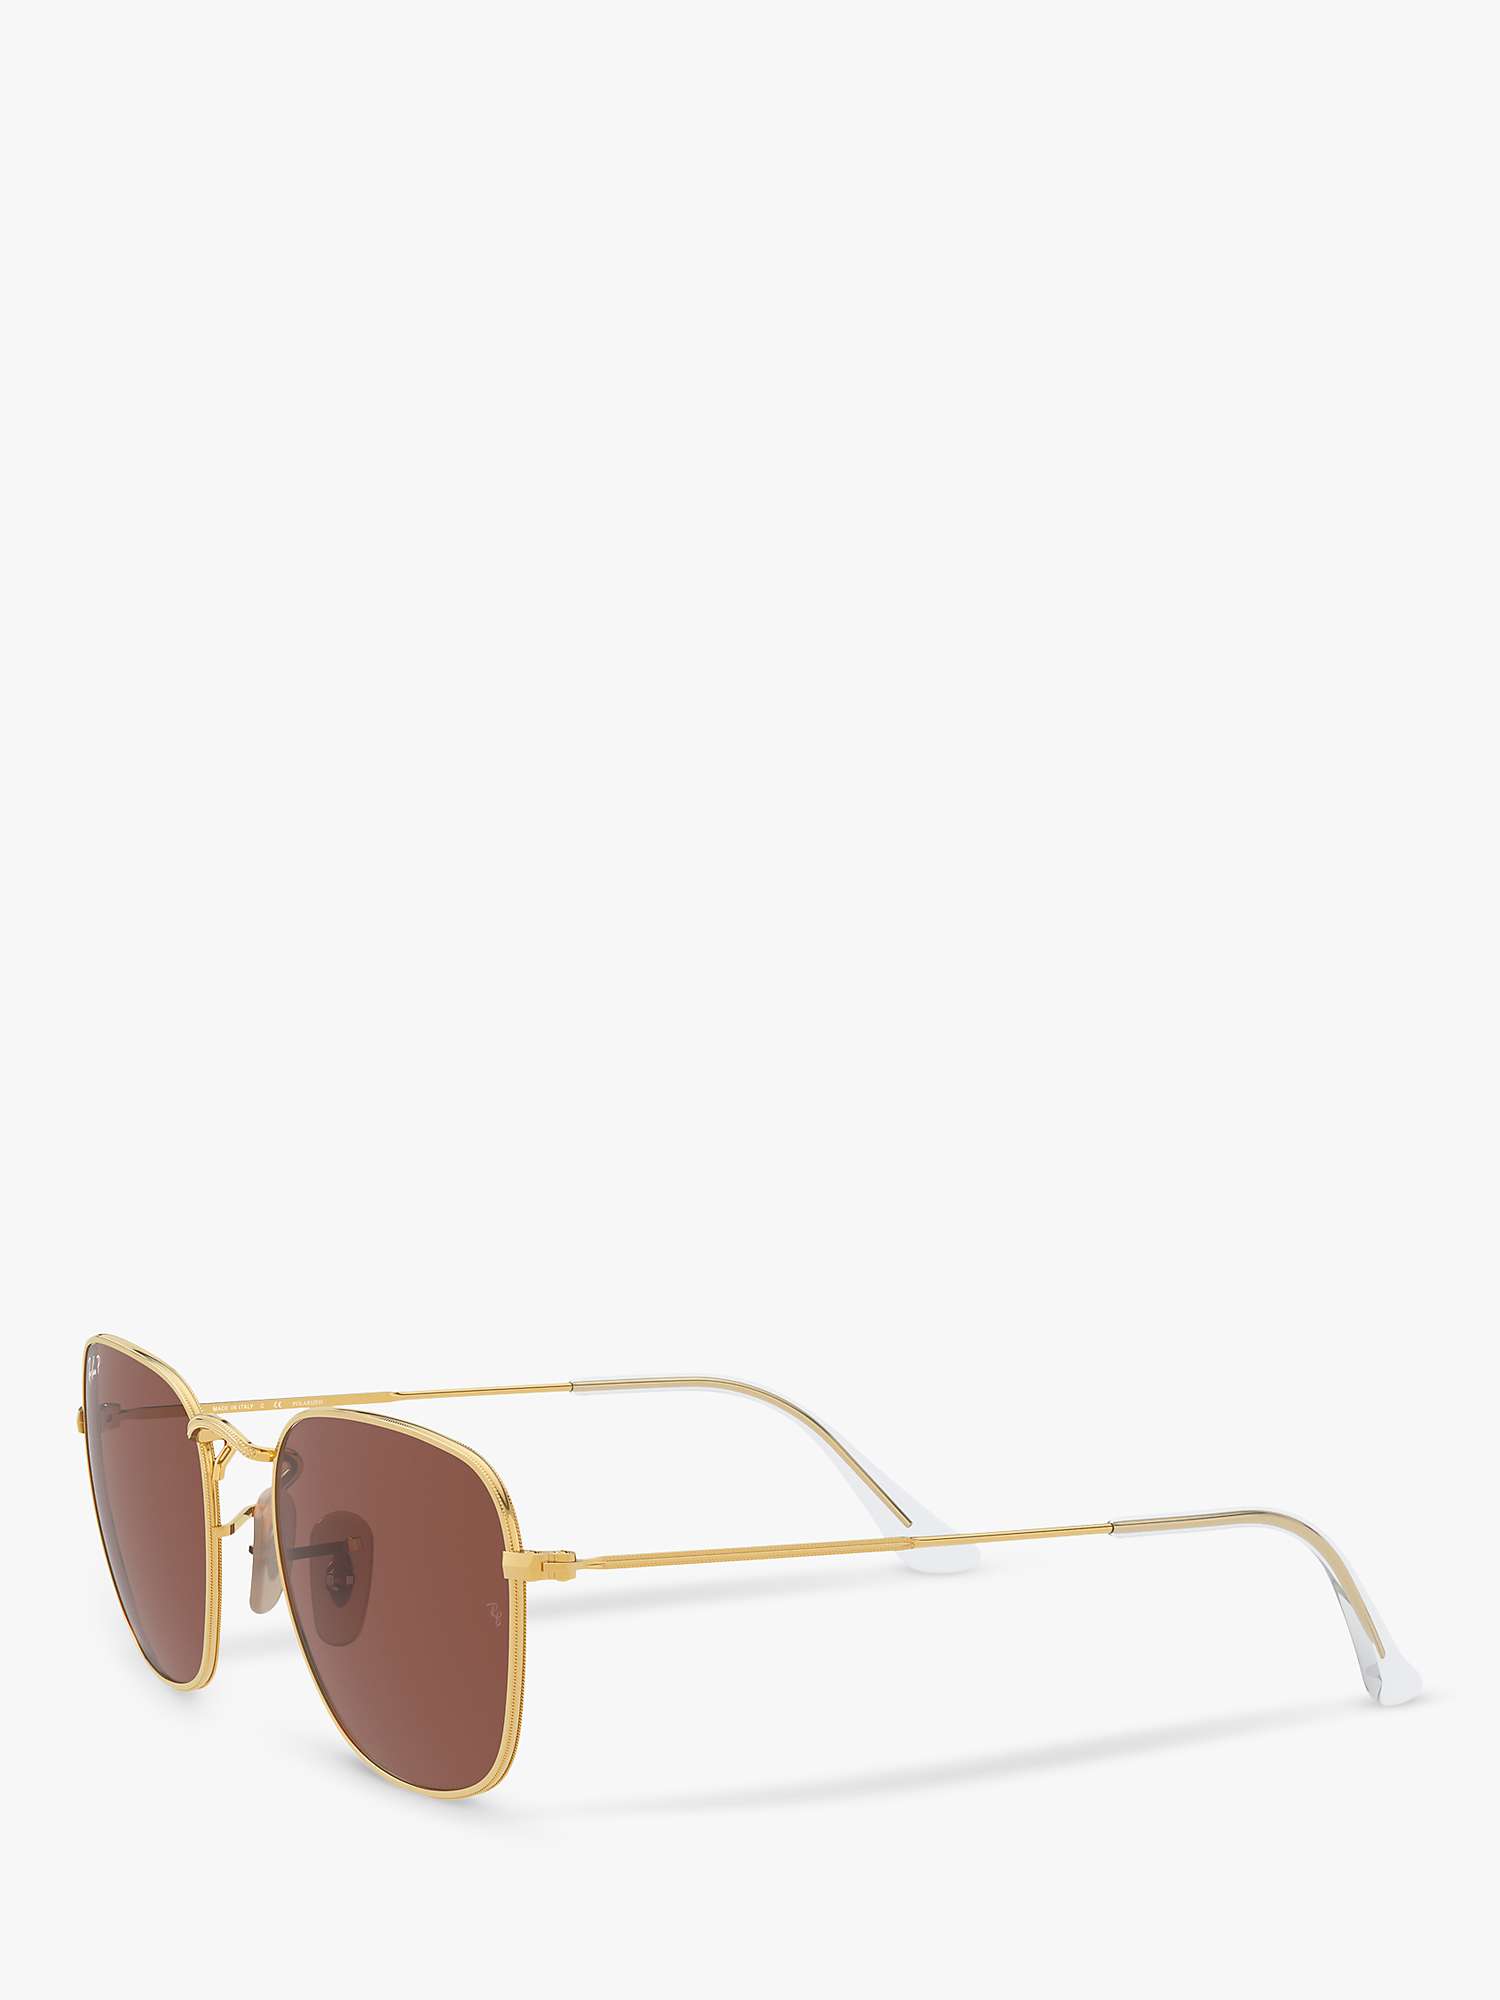 Buy Ray-Ban RB3857 Unisex Square Sunglasses, Gold/Brown Online at johnlewis.com